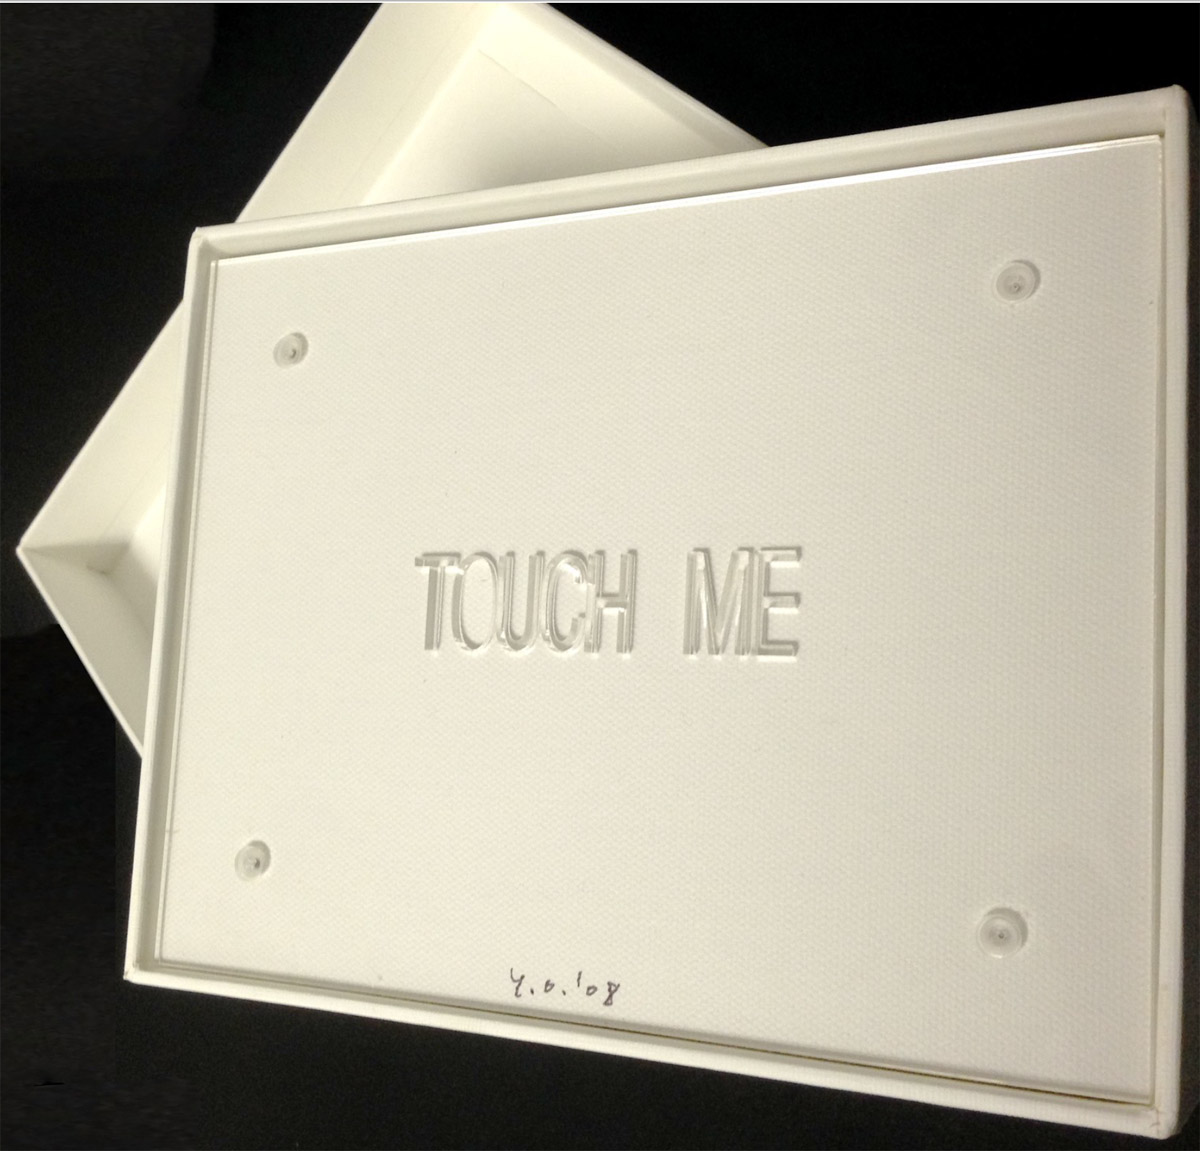 Fig. 20. Yoko Ono, Add Colour Painting: Touch Me, 2008. Ed. 300. Courtesy of Galerie Lelong & Co., New York. © Yoko Ono 